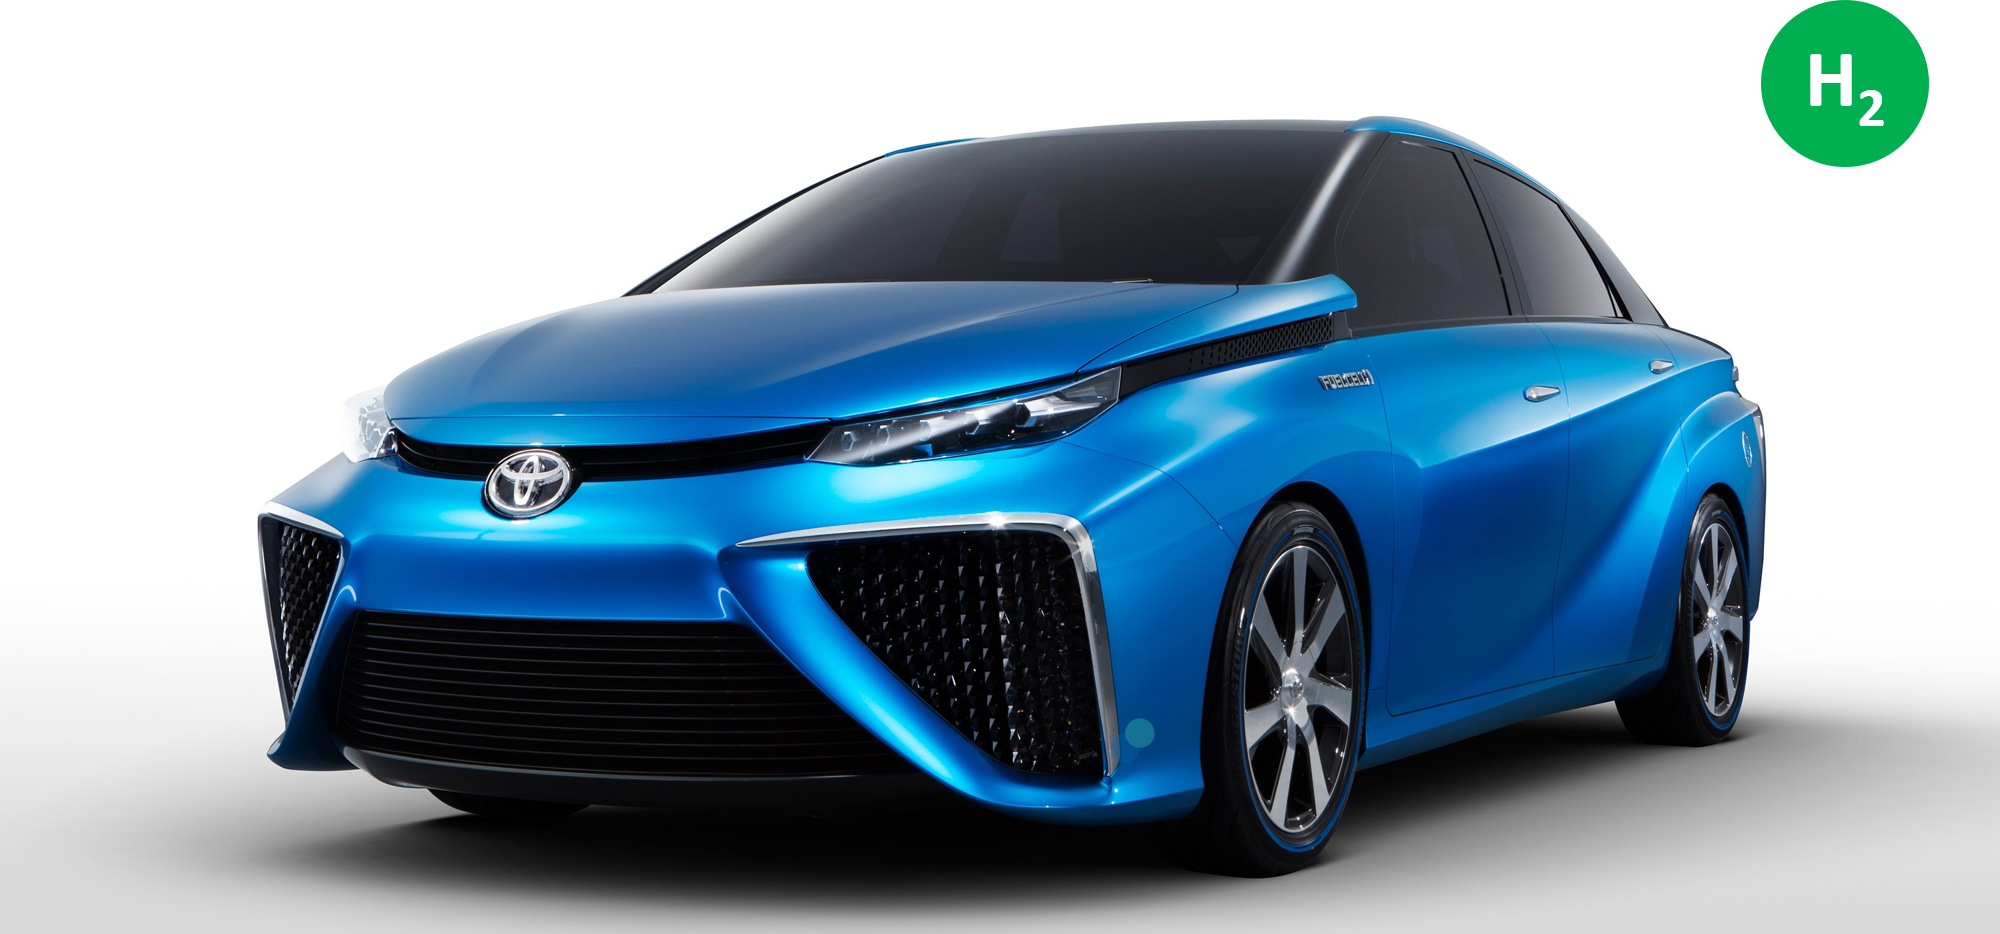 Hydrogen Fuel Cell Passenger Vehicles Ready for TakeOff, says